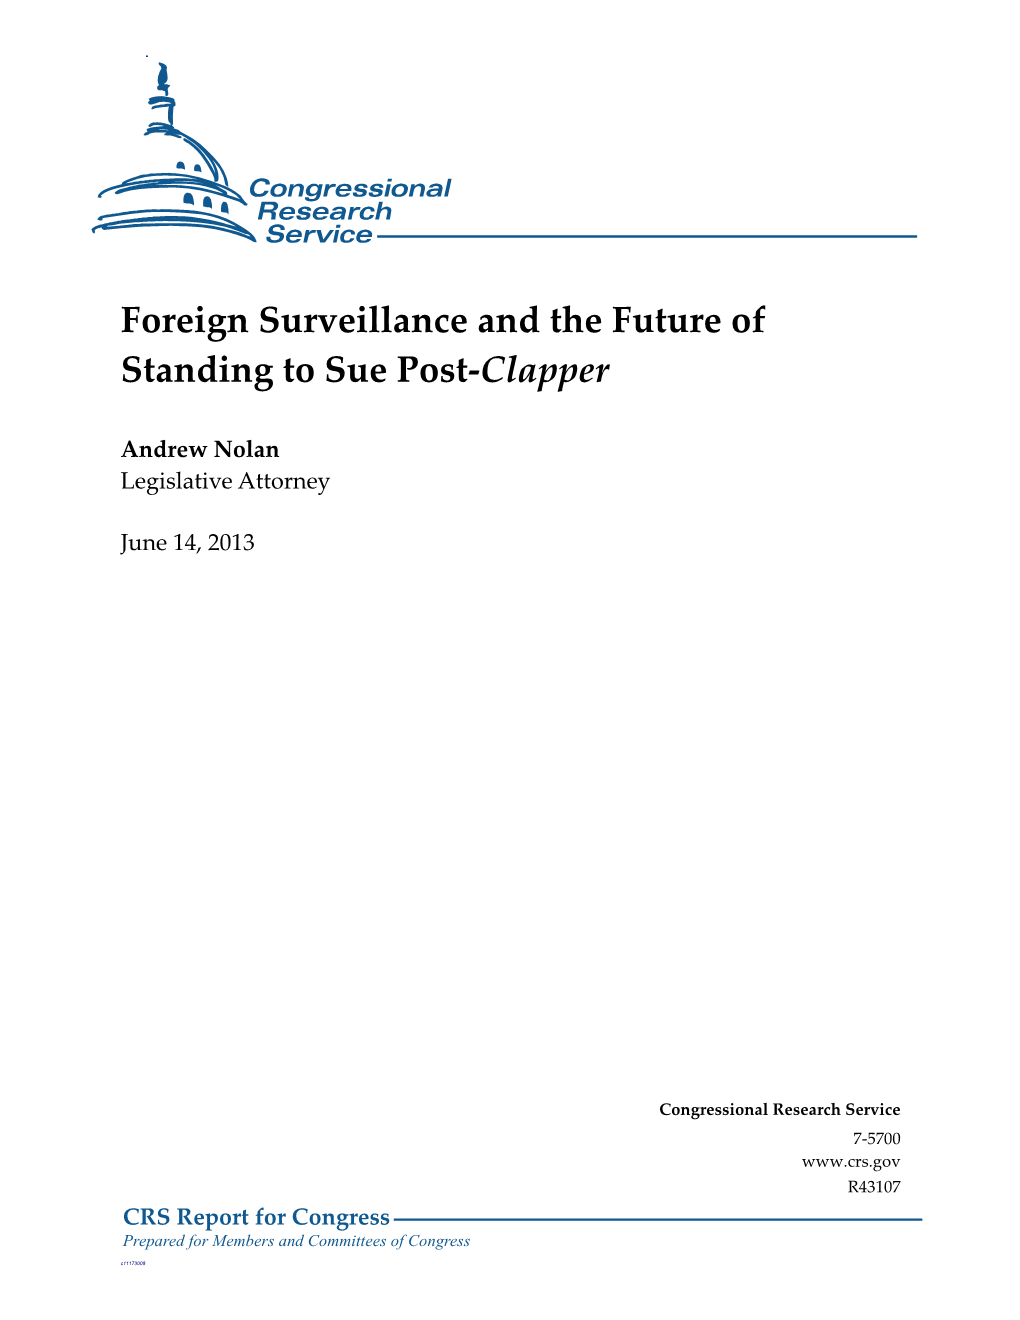 Foreign Surveillance and the Future of Standing to Sue Post-Clapper